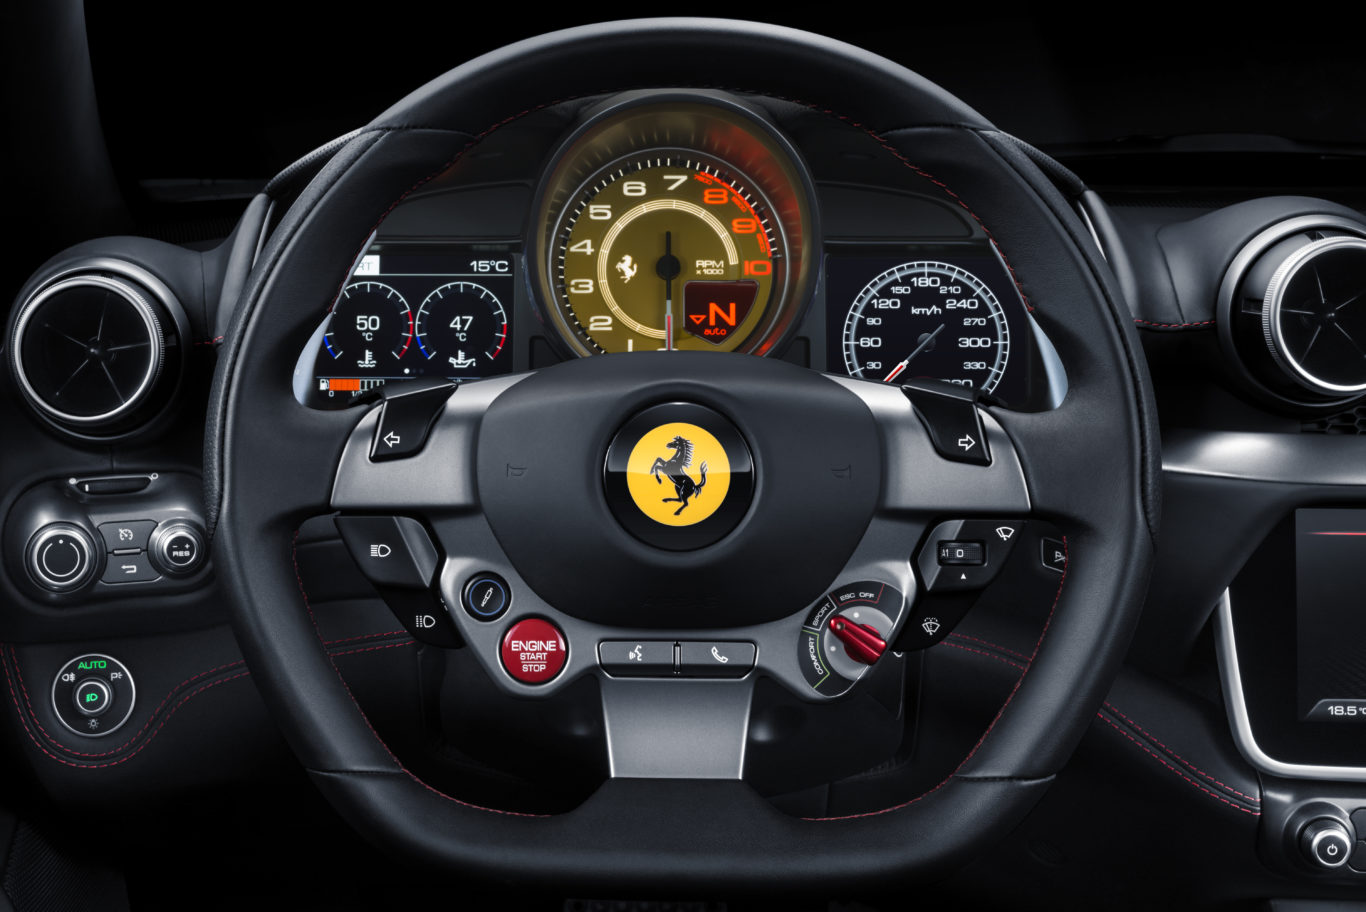 All of the car's major controls are located on the steering wheel